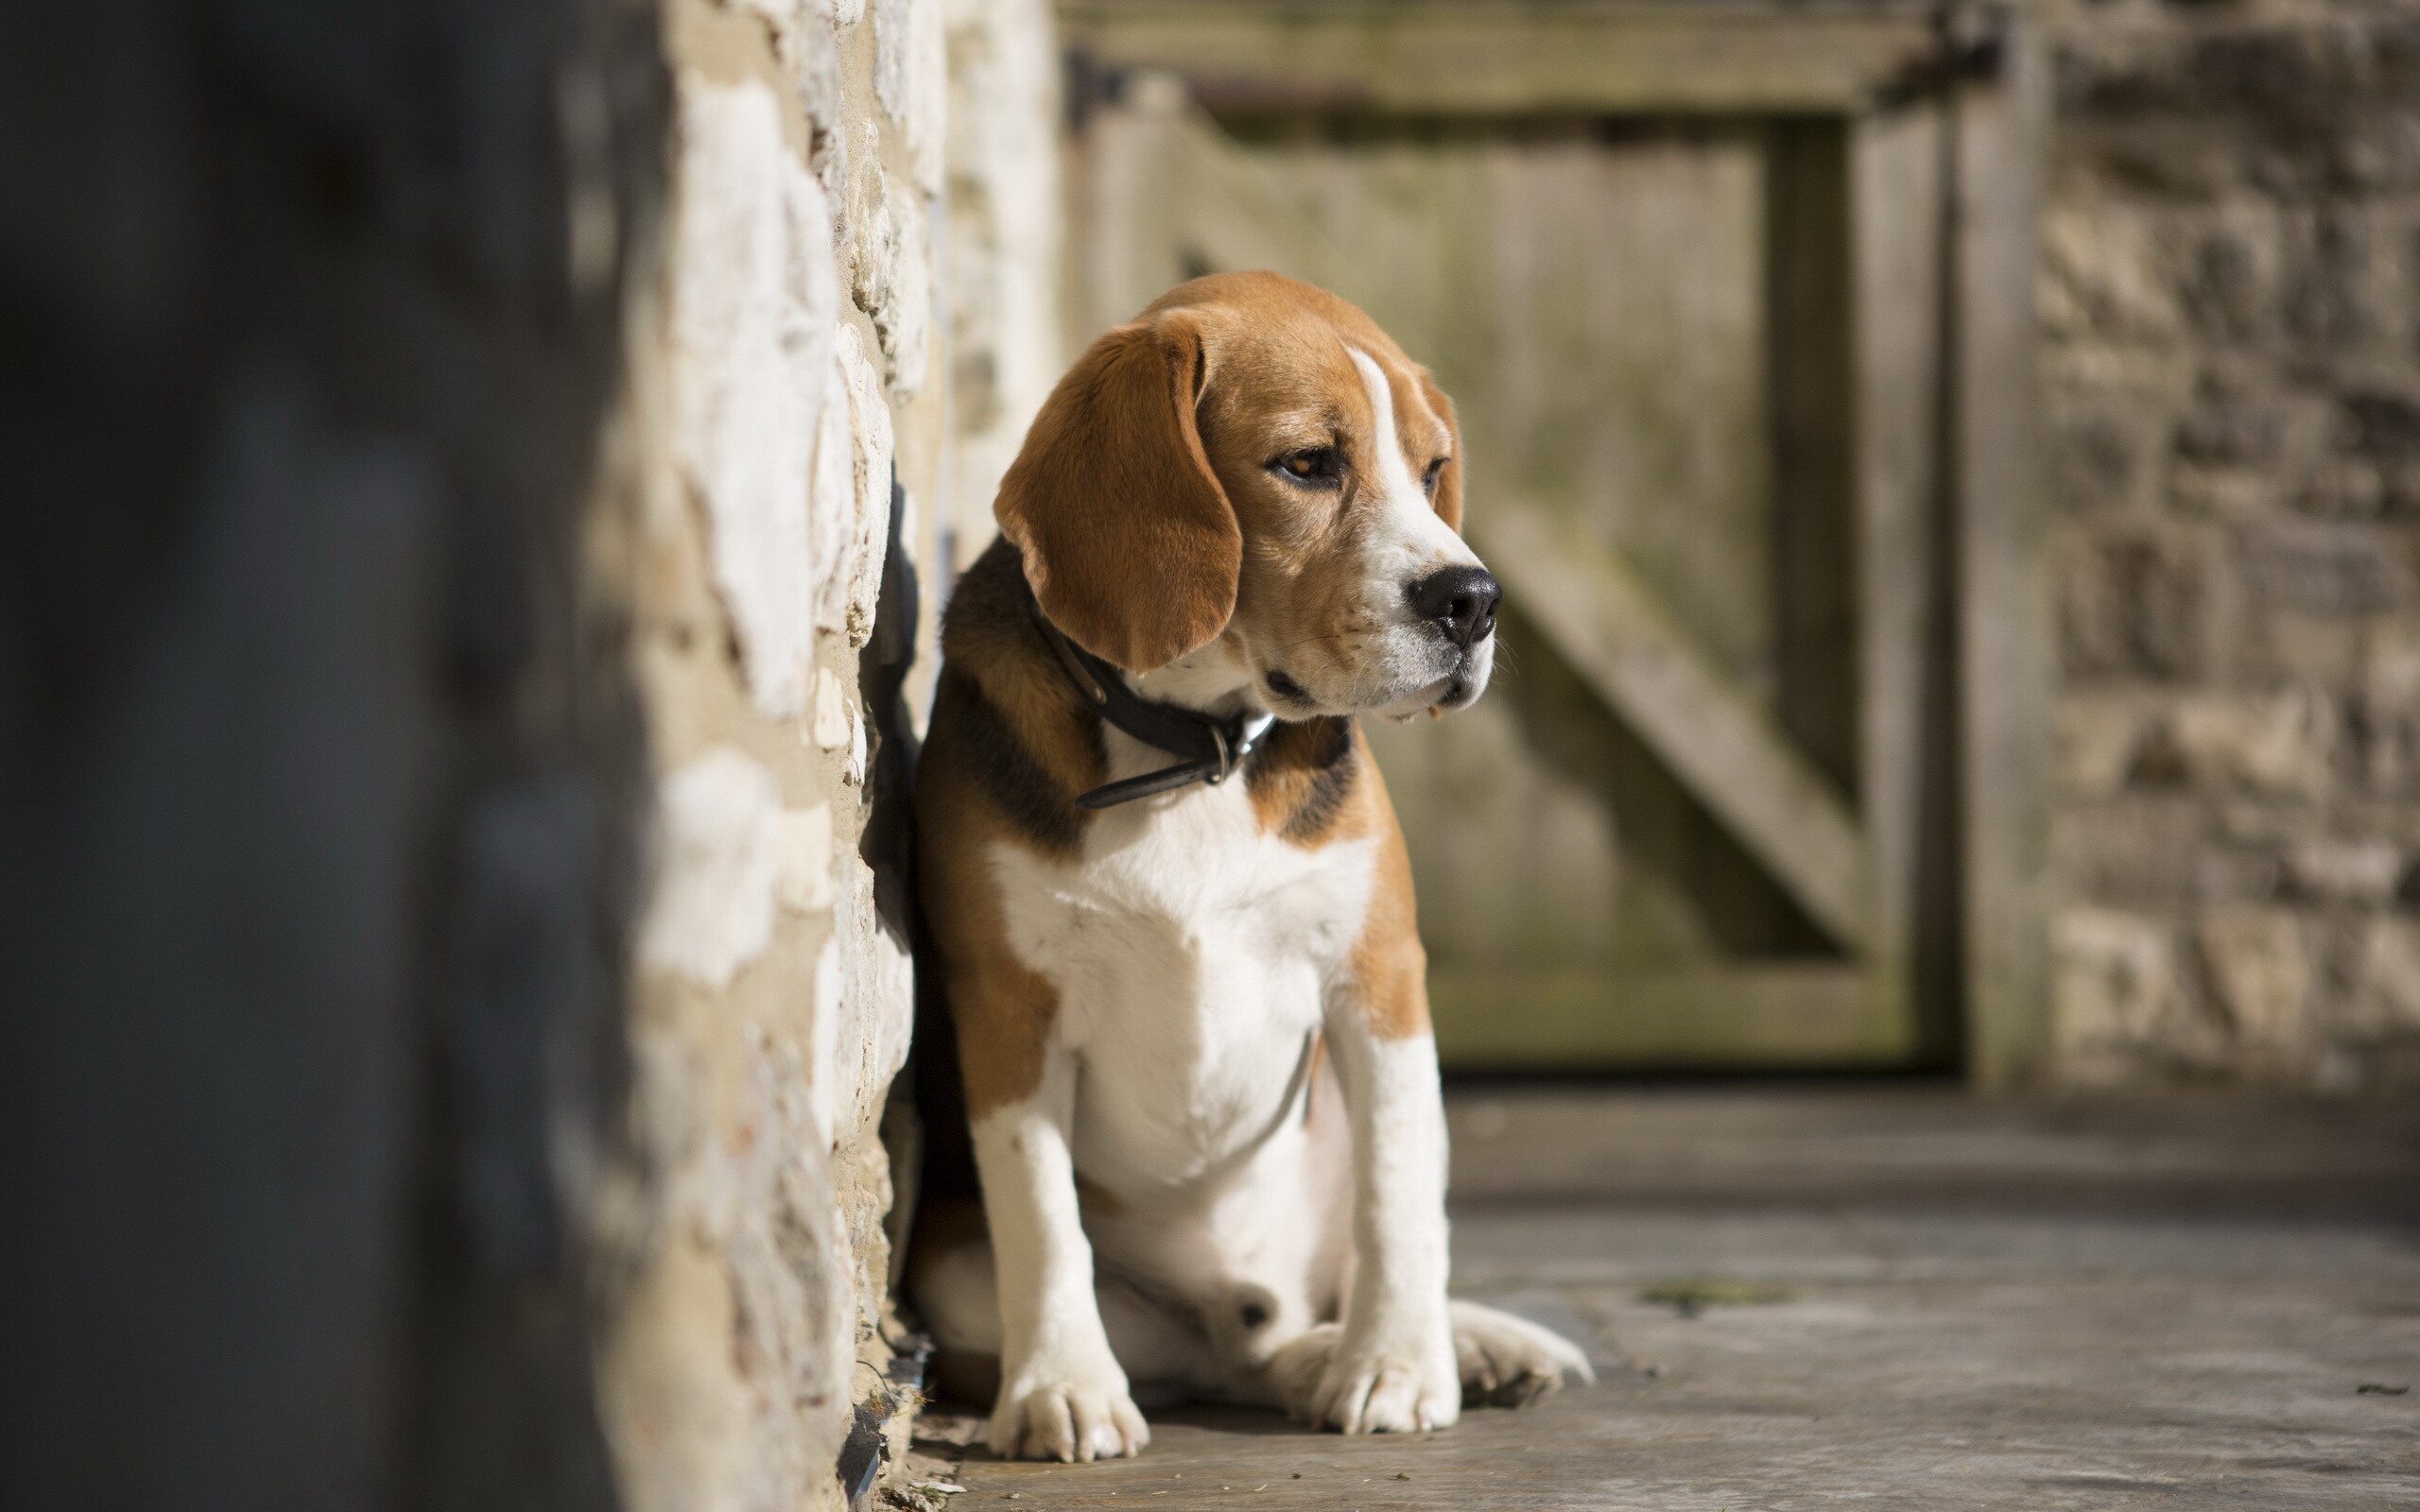 Beagle: The breed ranked 4th most popular in 2012 and 2013 in the United States. 2560x1600 HD Background.